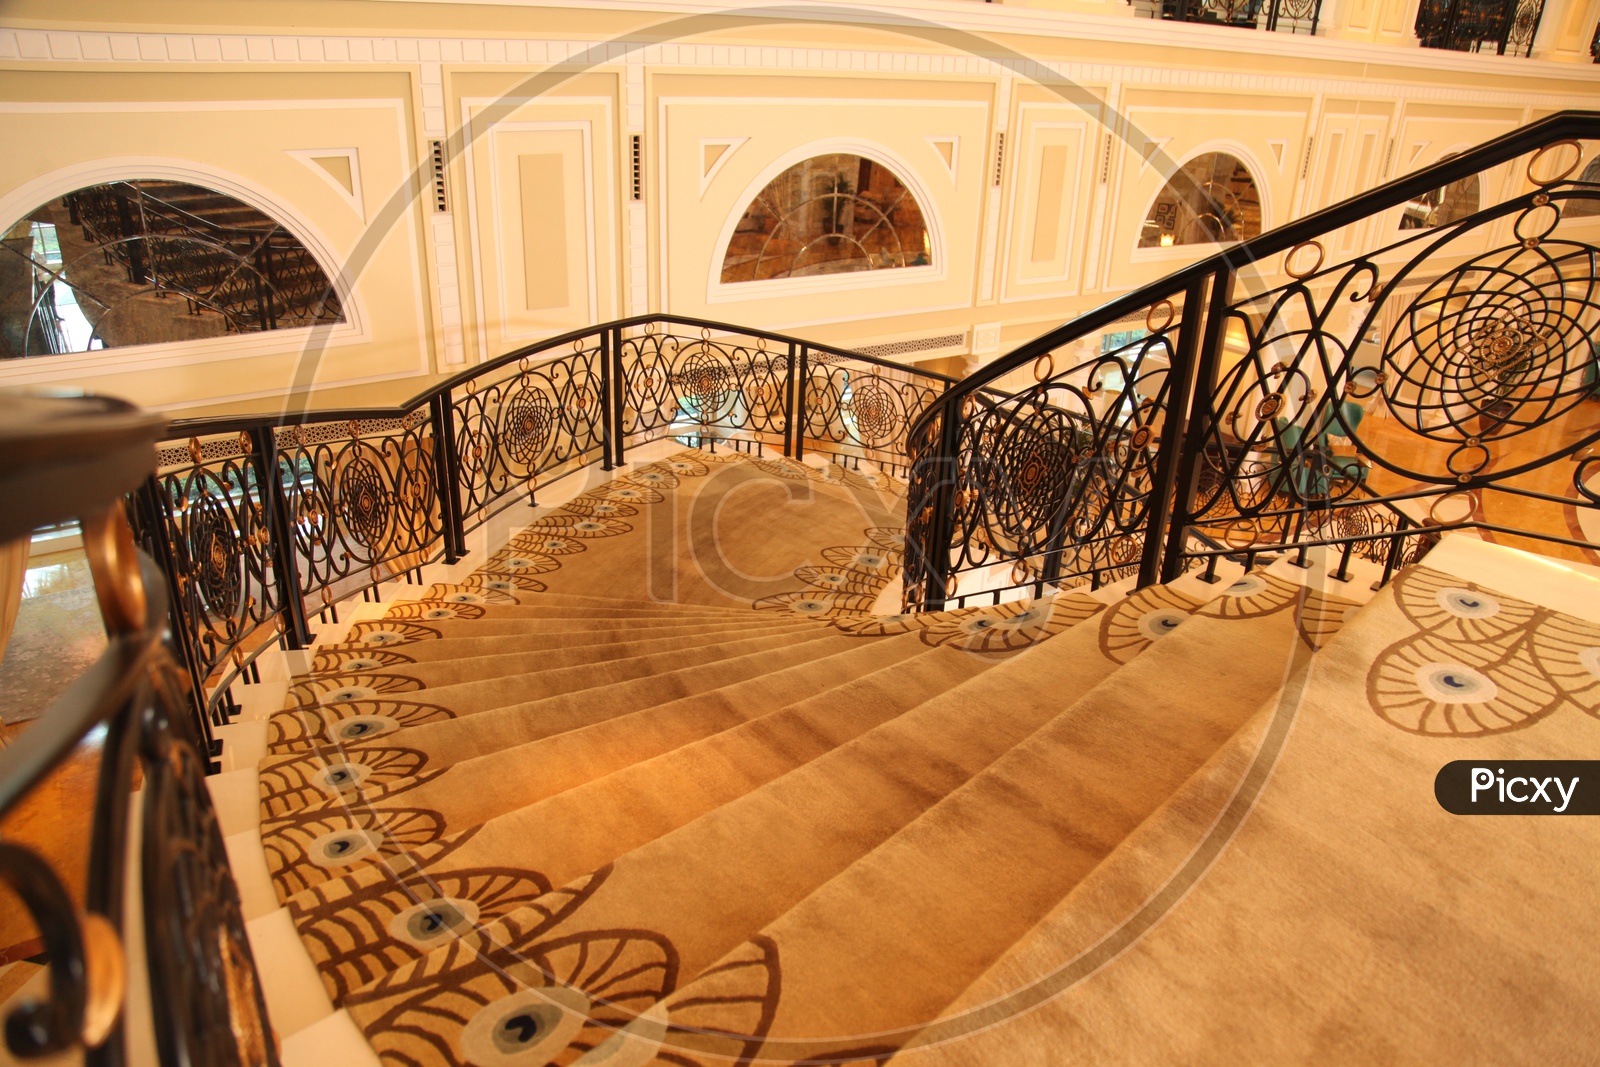 Stair case with carpet